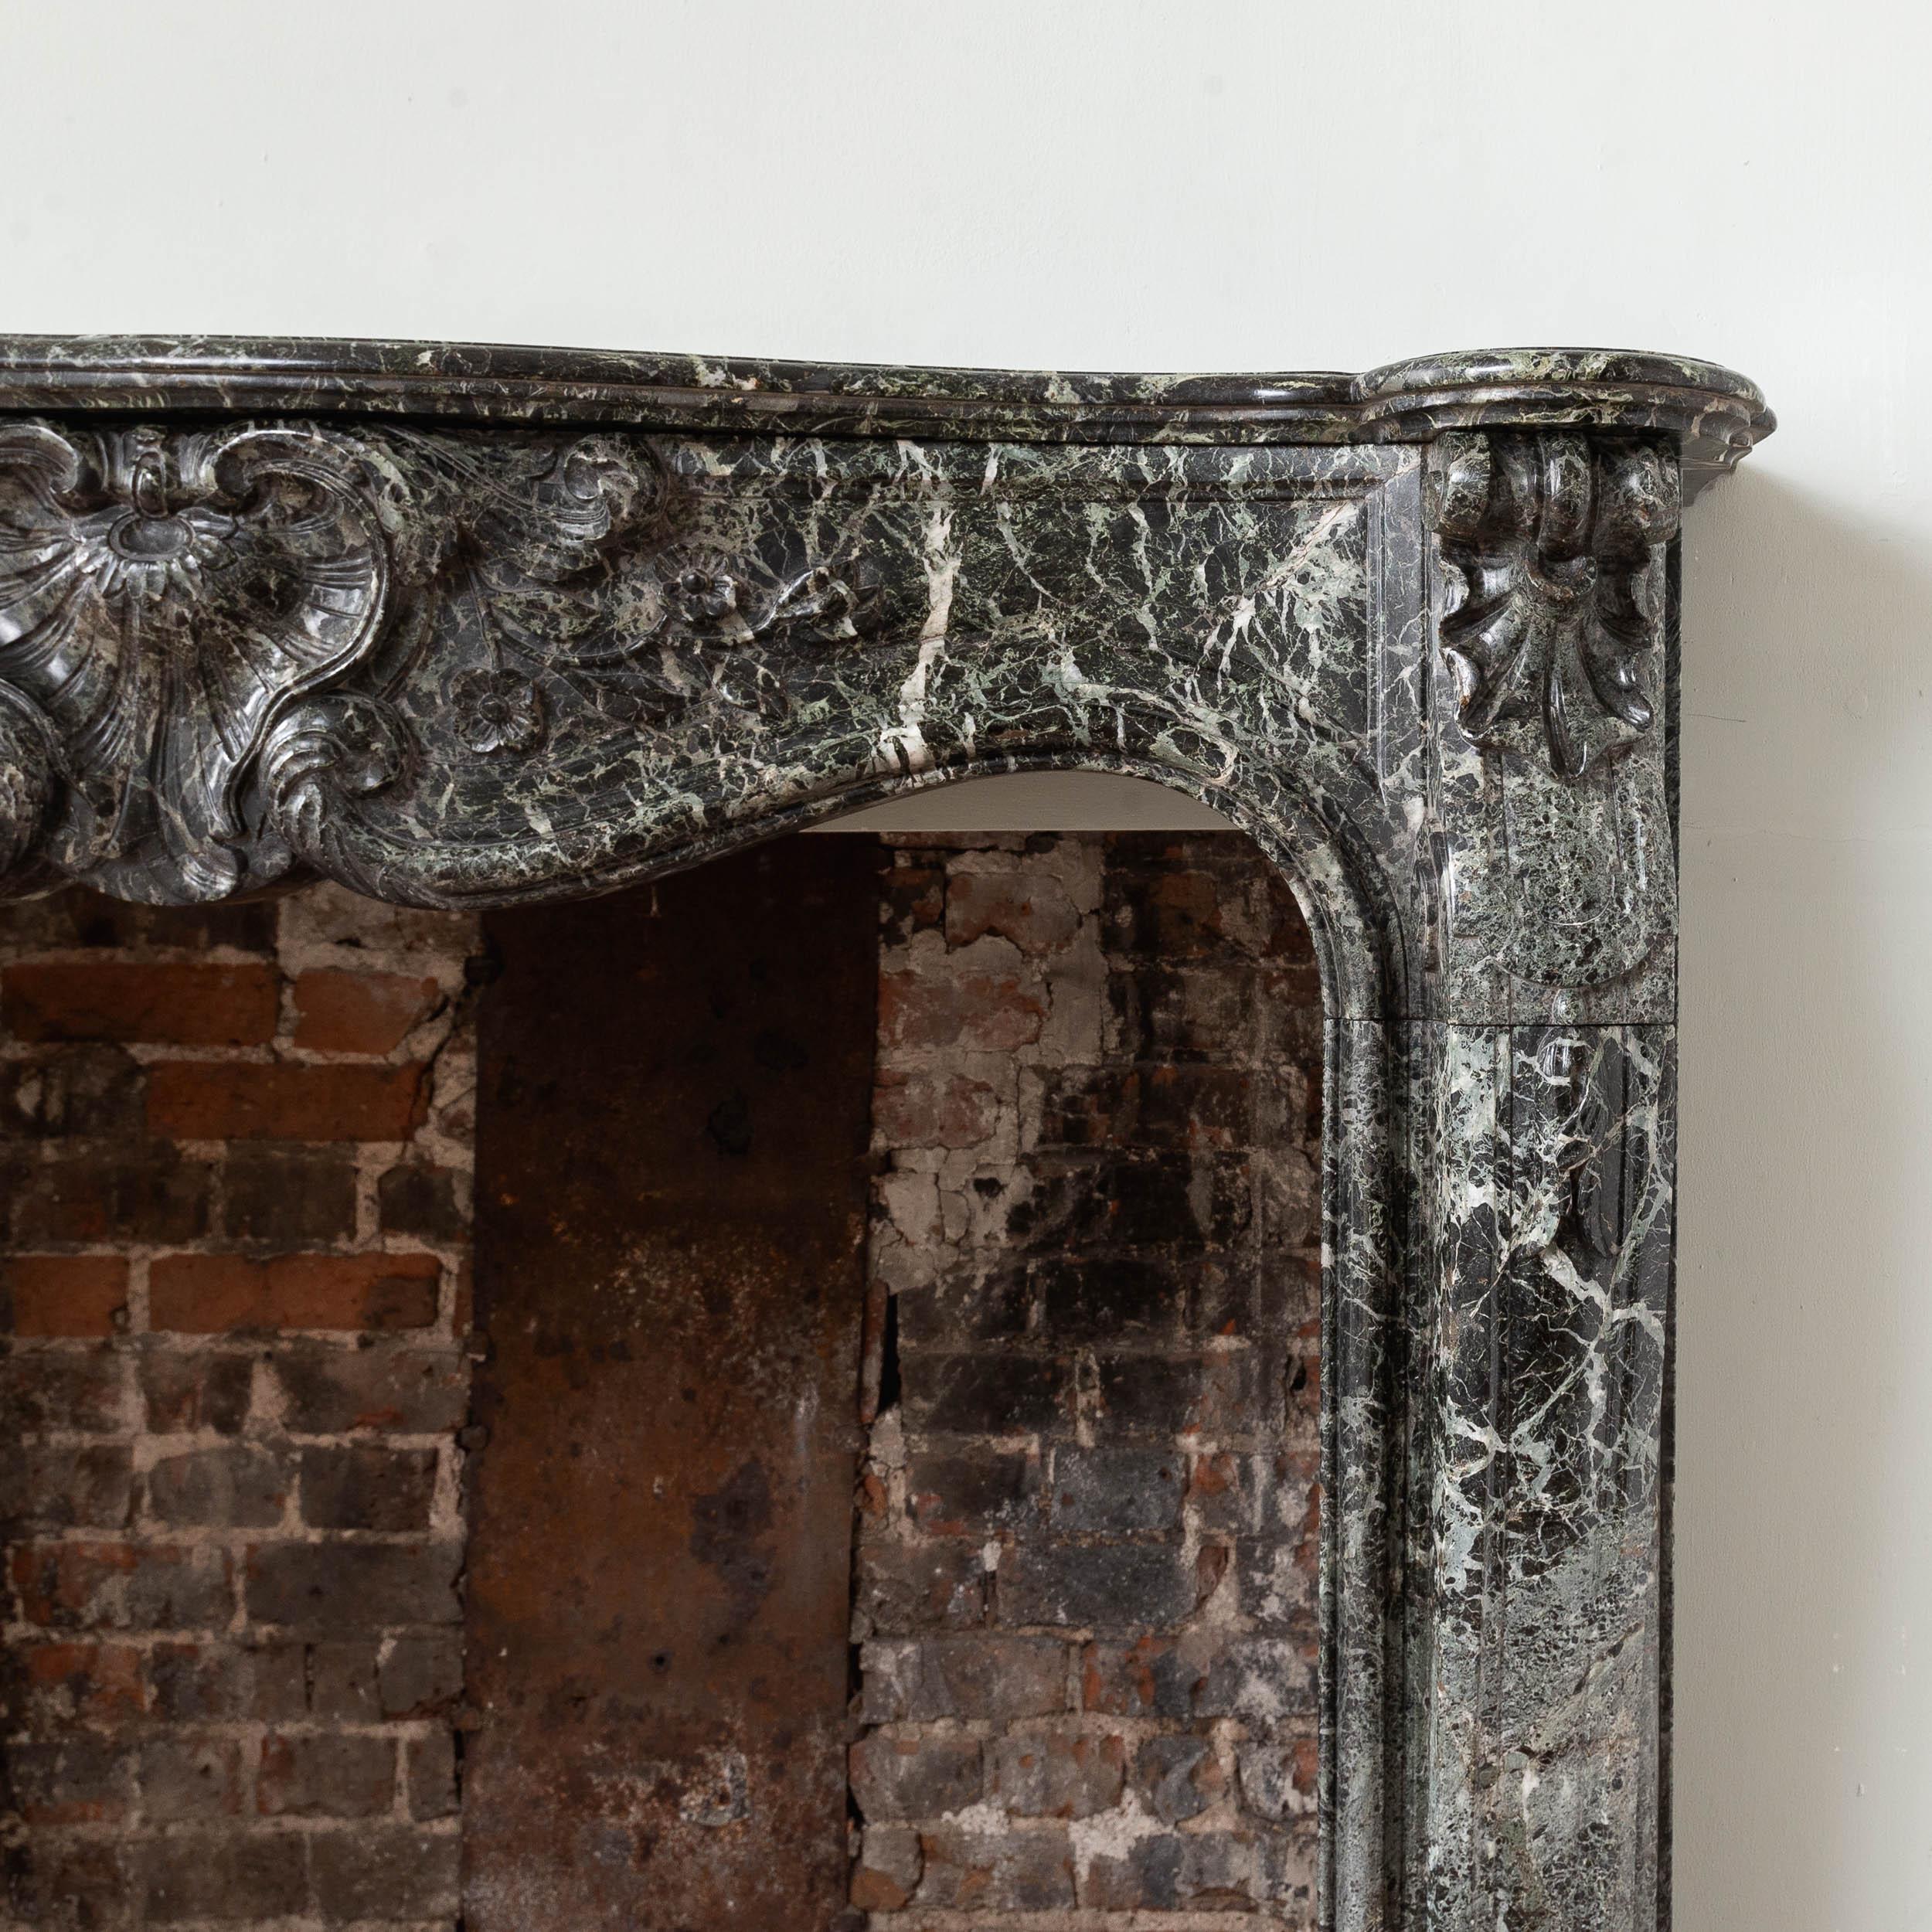 A Nineteenth century Verde Tinos fireplace, French or Italian, the frieze centred with cartouche and trails of flowers carved in relief, raised on scrolled jambs.

Dimensions:
120cm (47¼